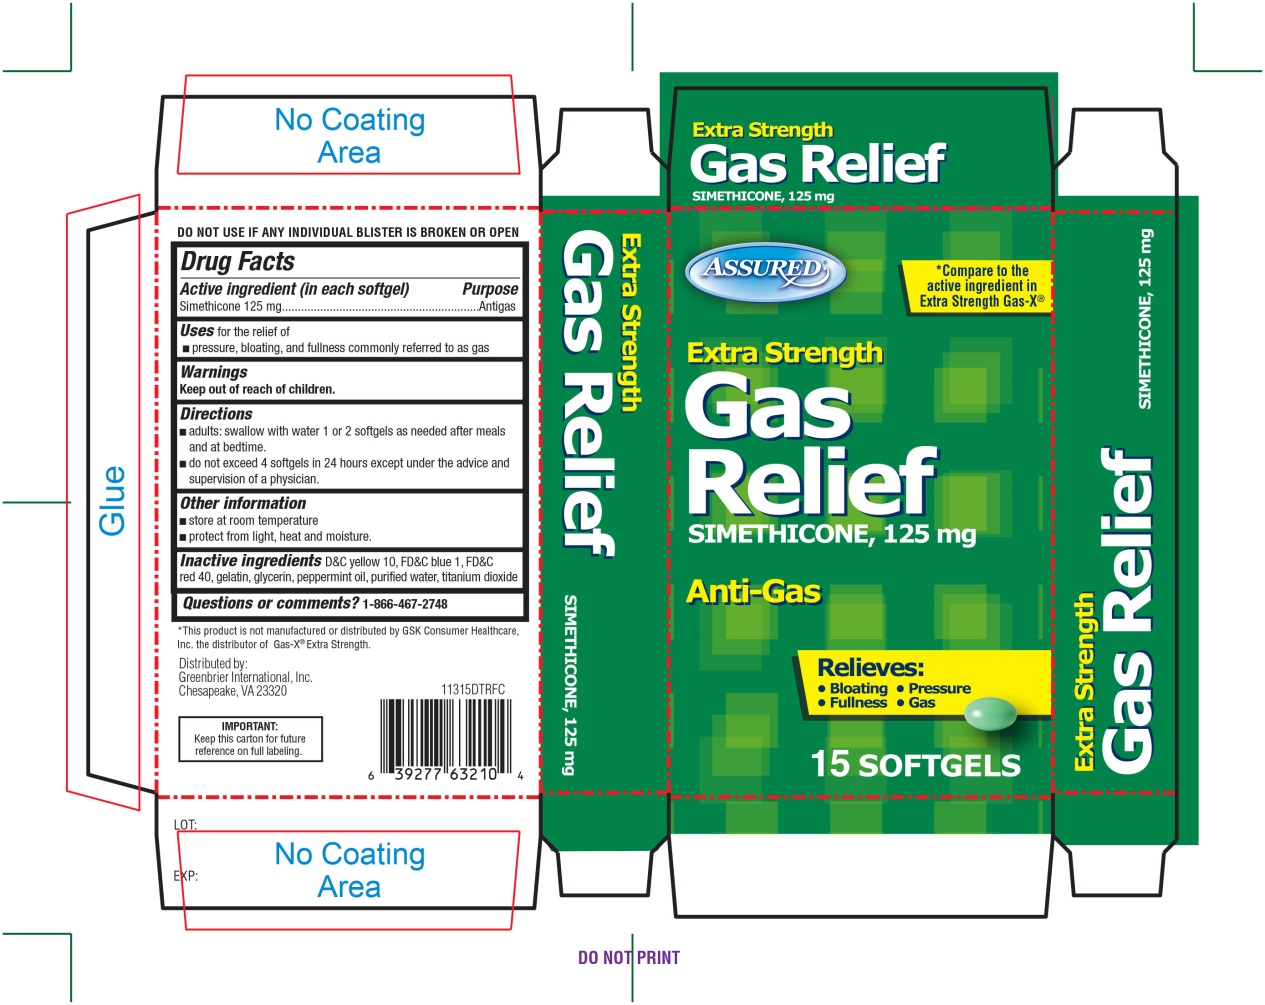  Extra Strength Gas Relief Simeticone ,125 mg  Anti-Gas 15 Softgels